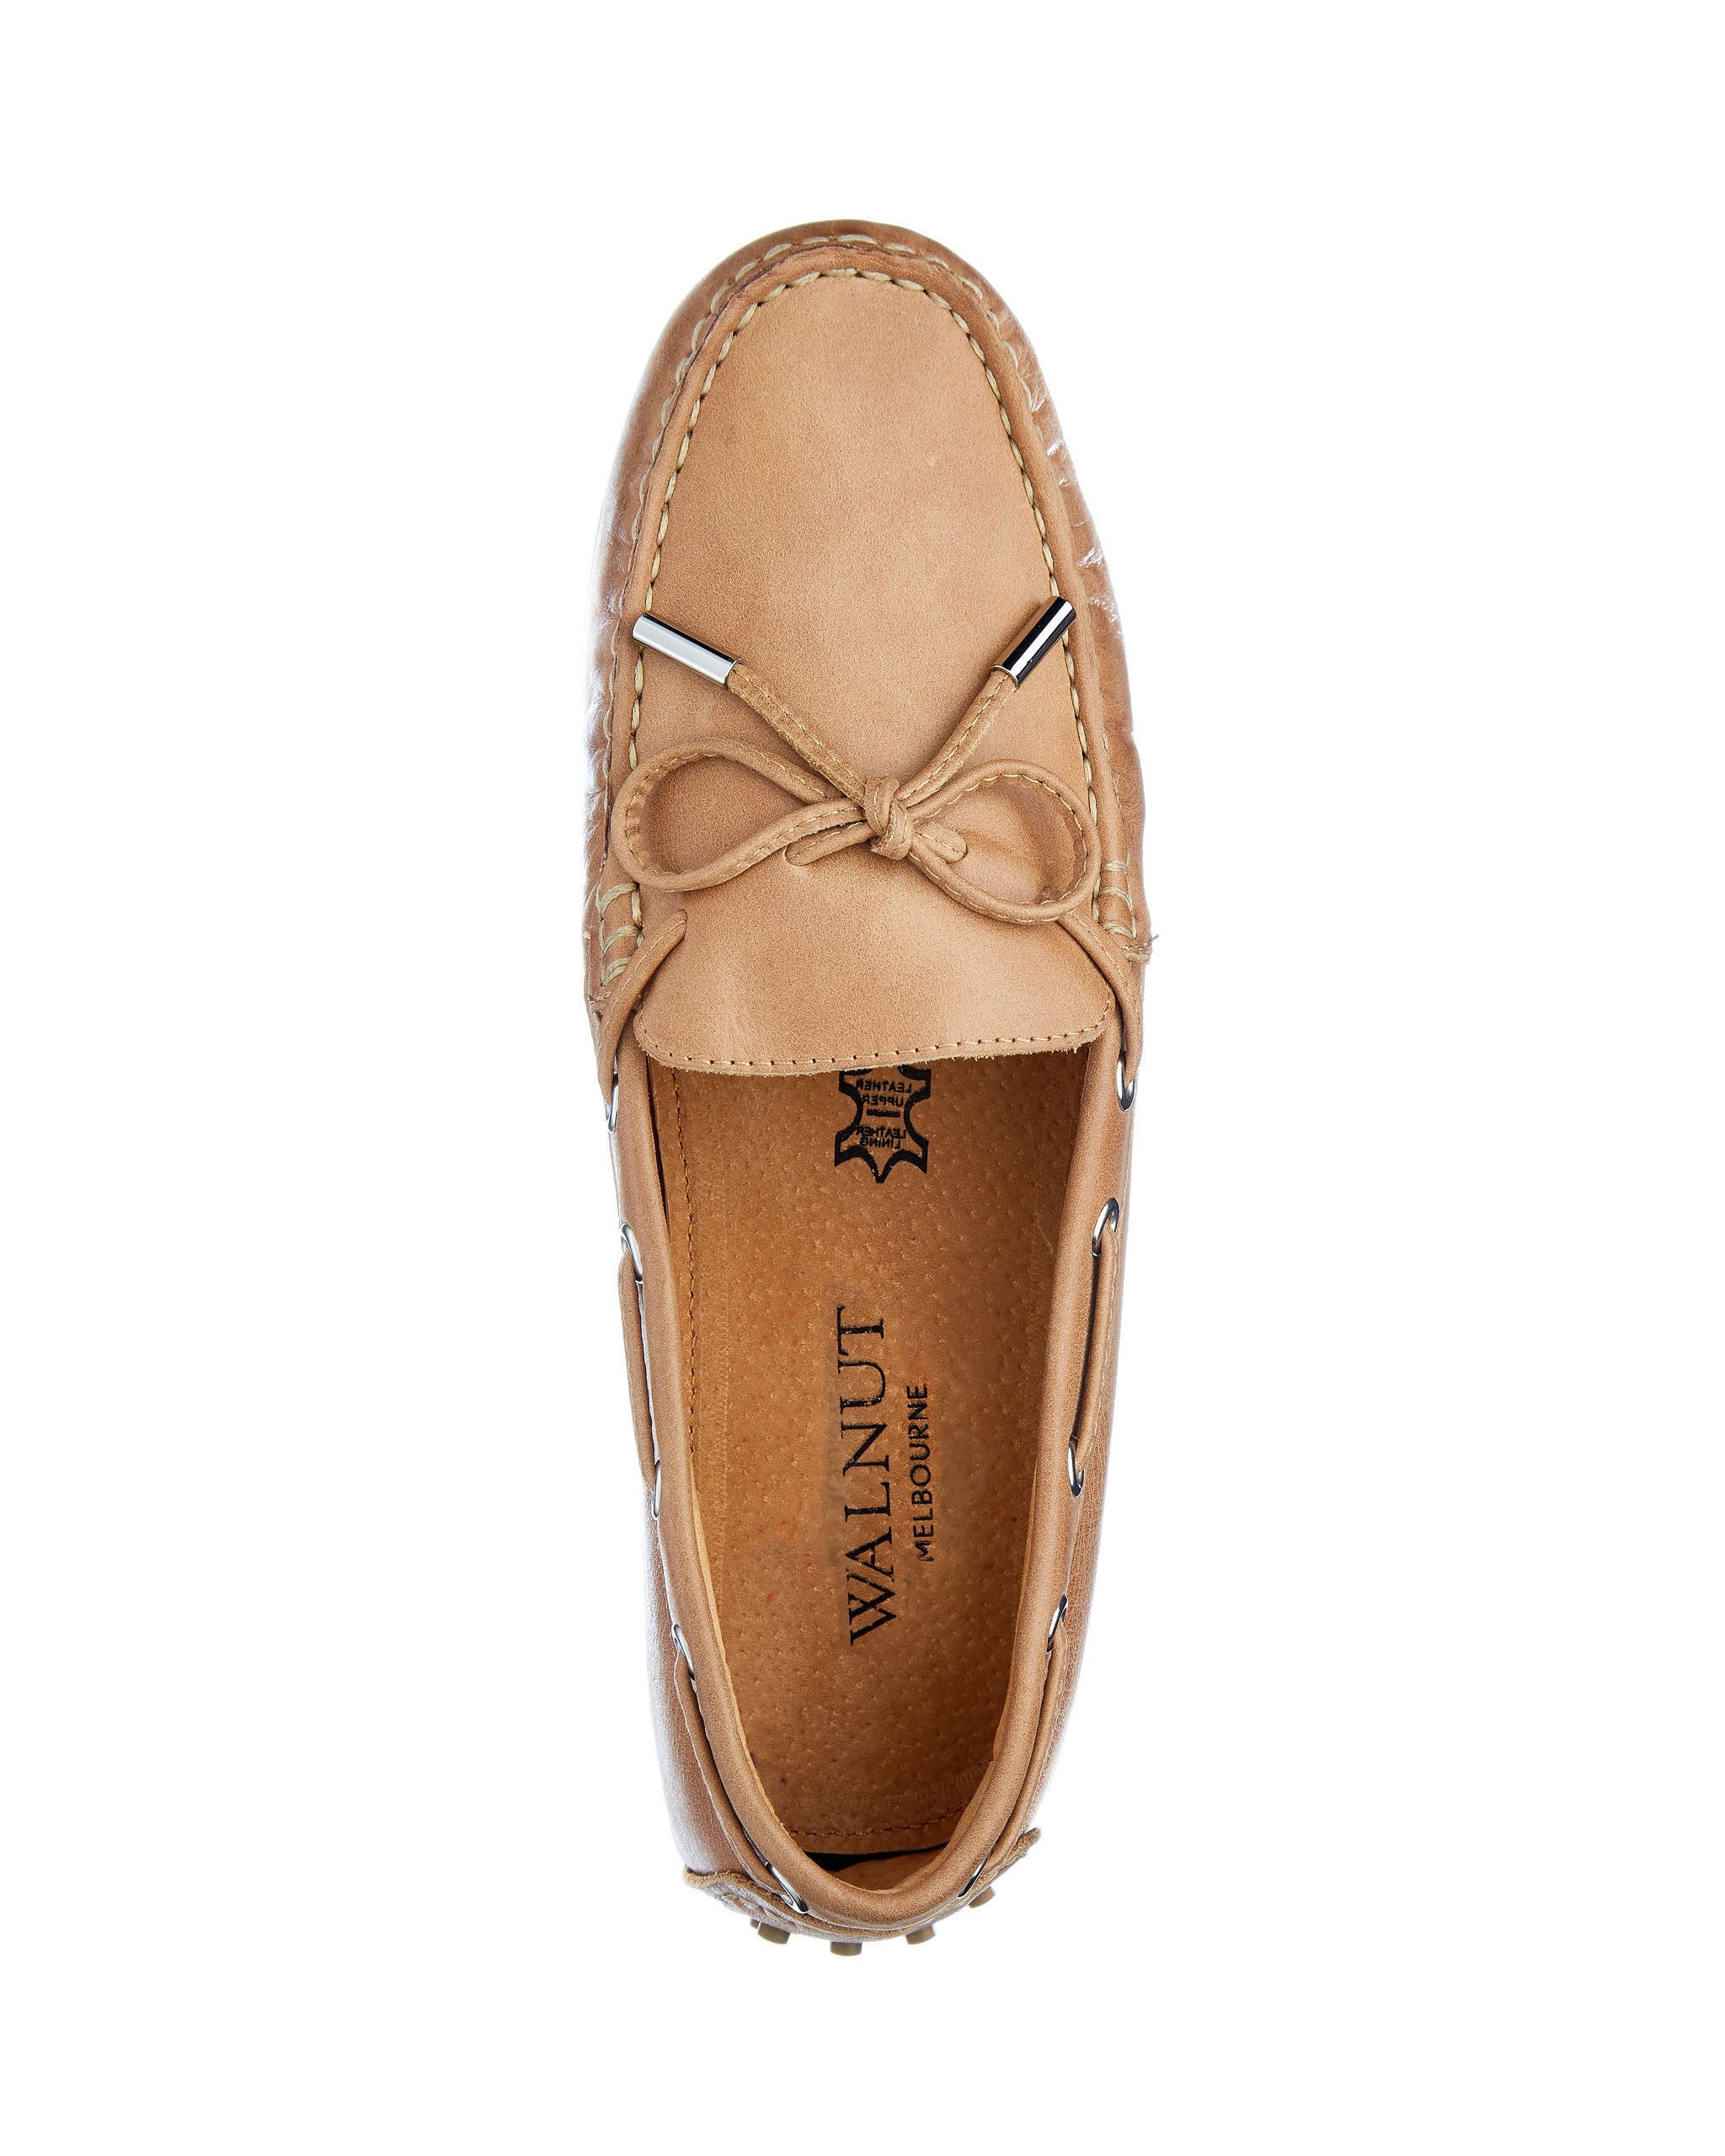 Daria Leather Plait Loafer Blush side view